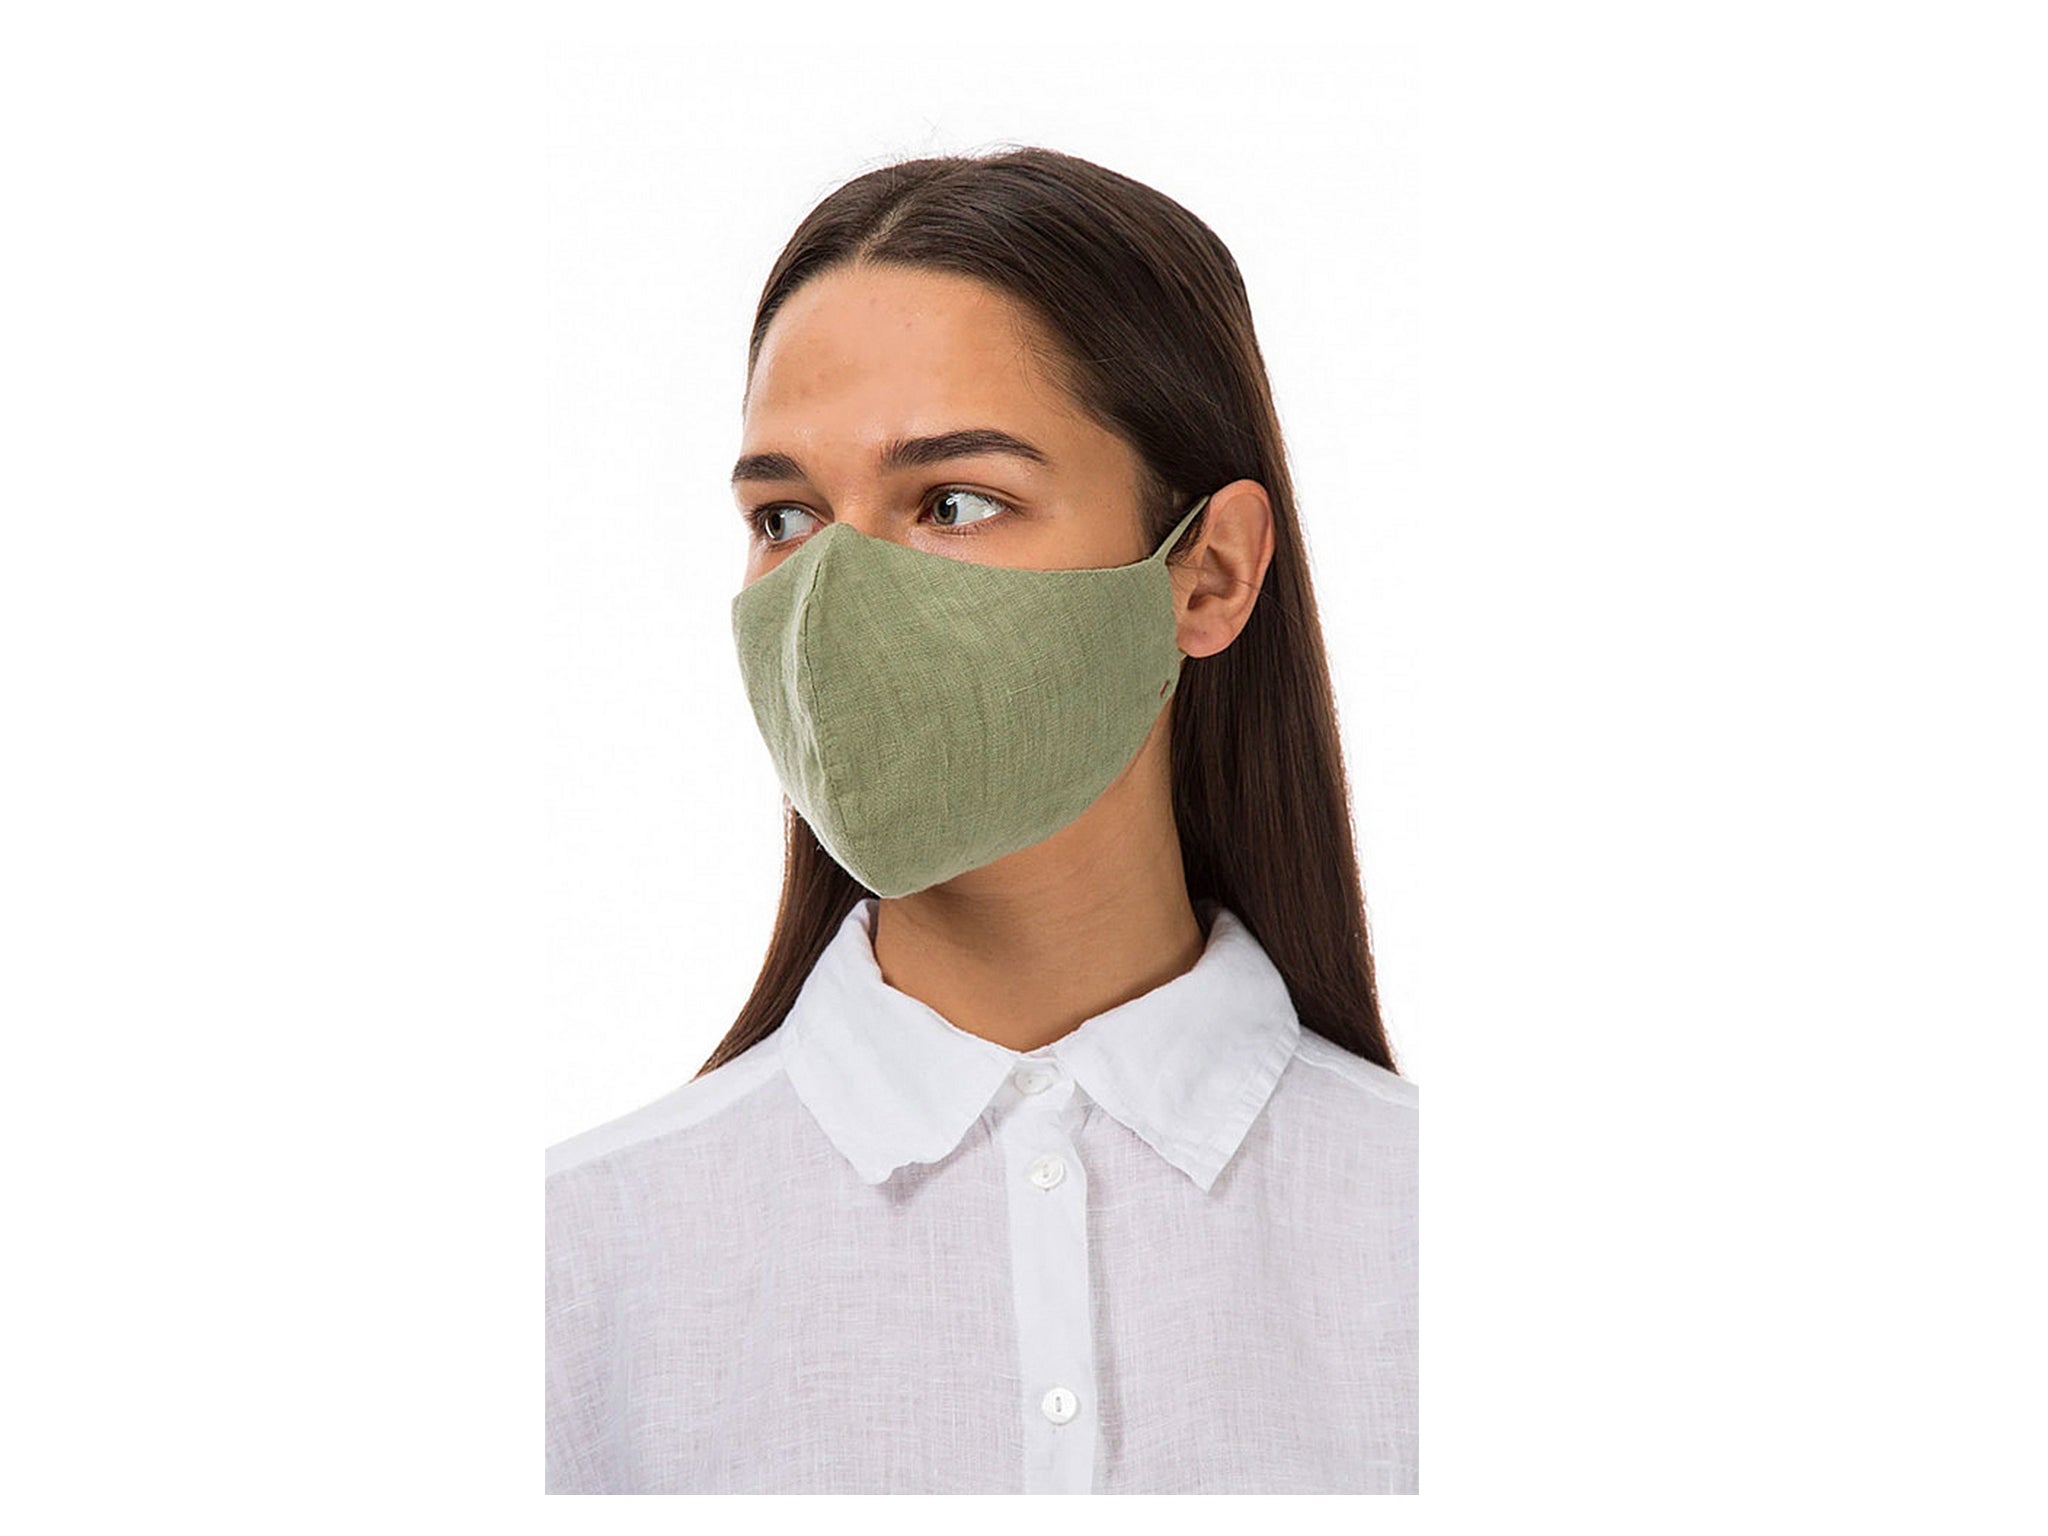 Fashion brand Plumo?is making?its masks using lightweight, breathable linen